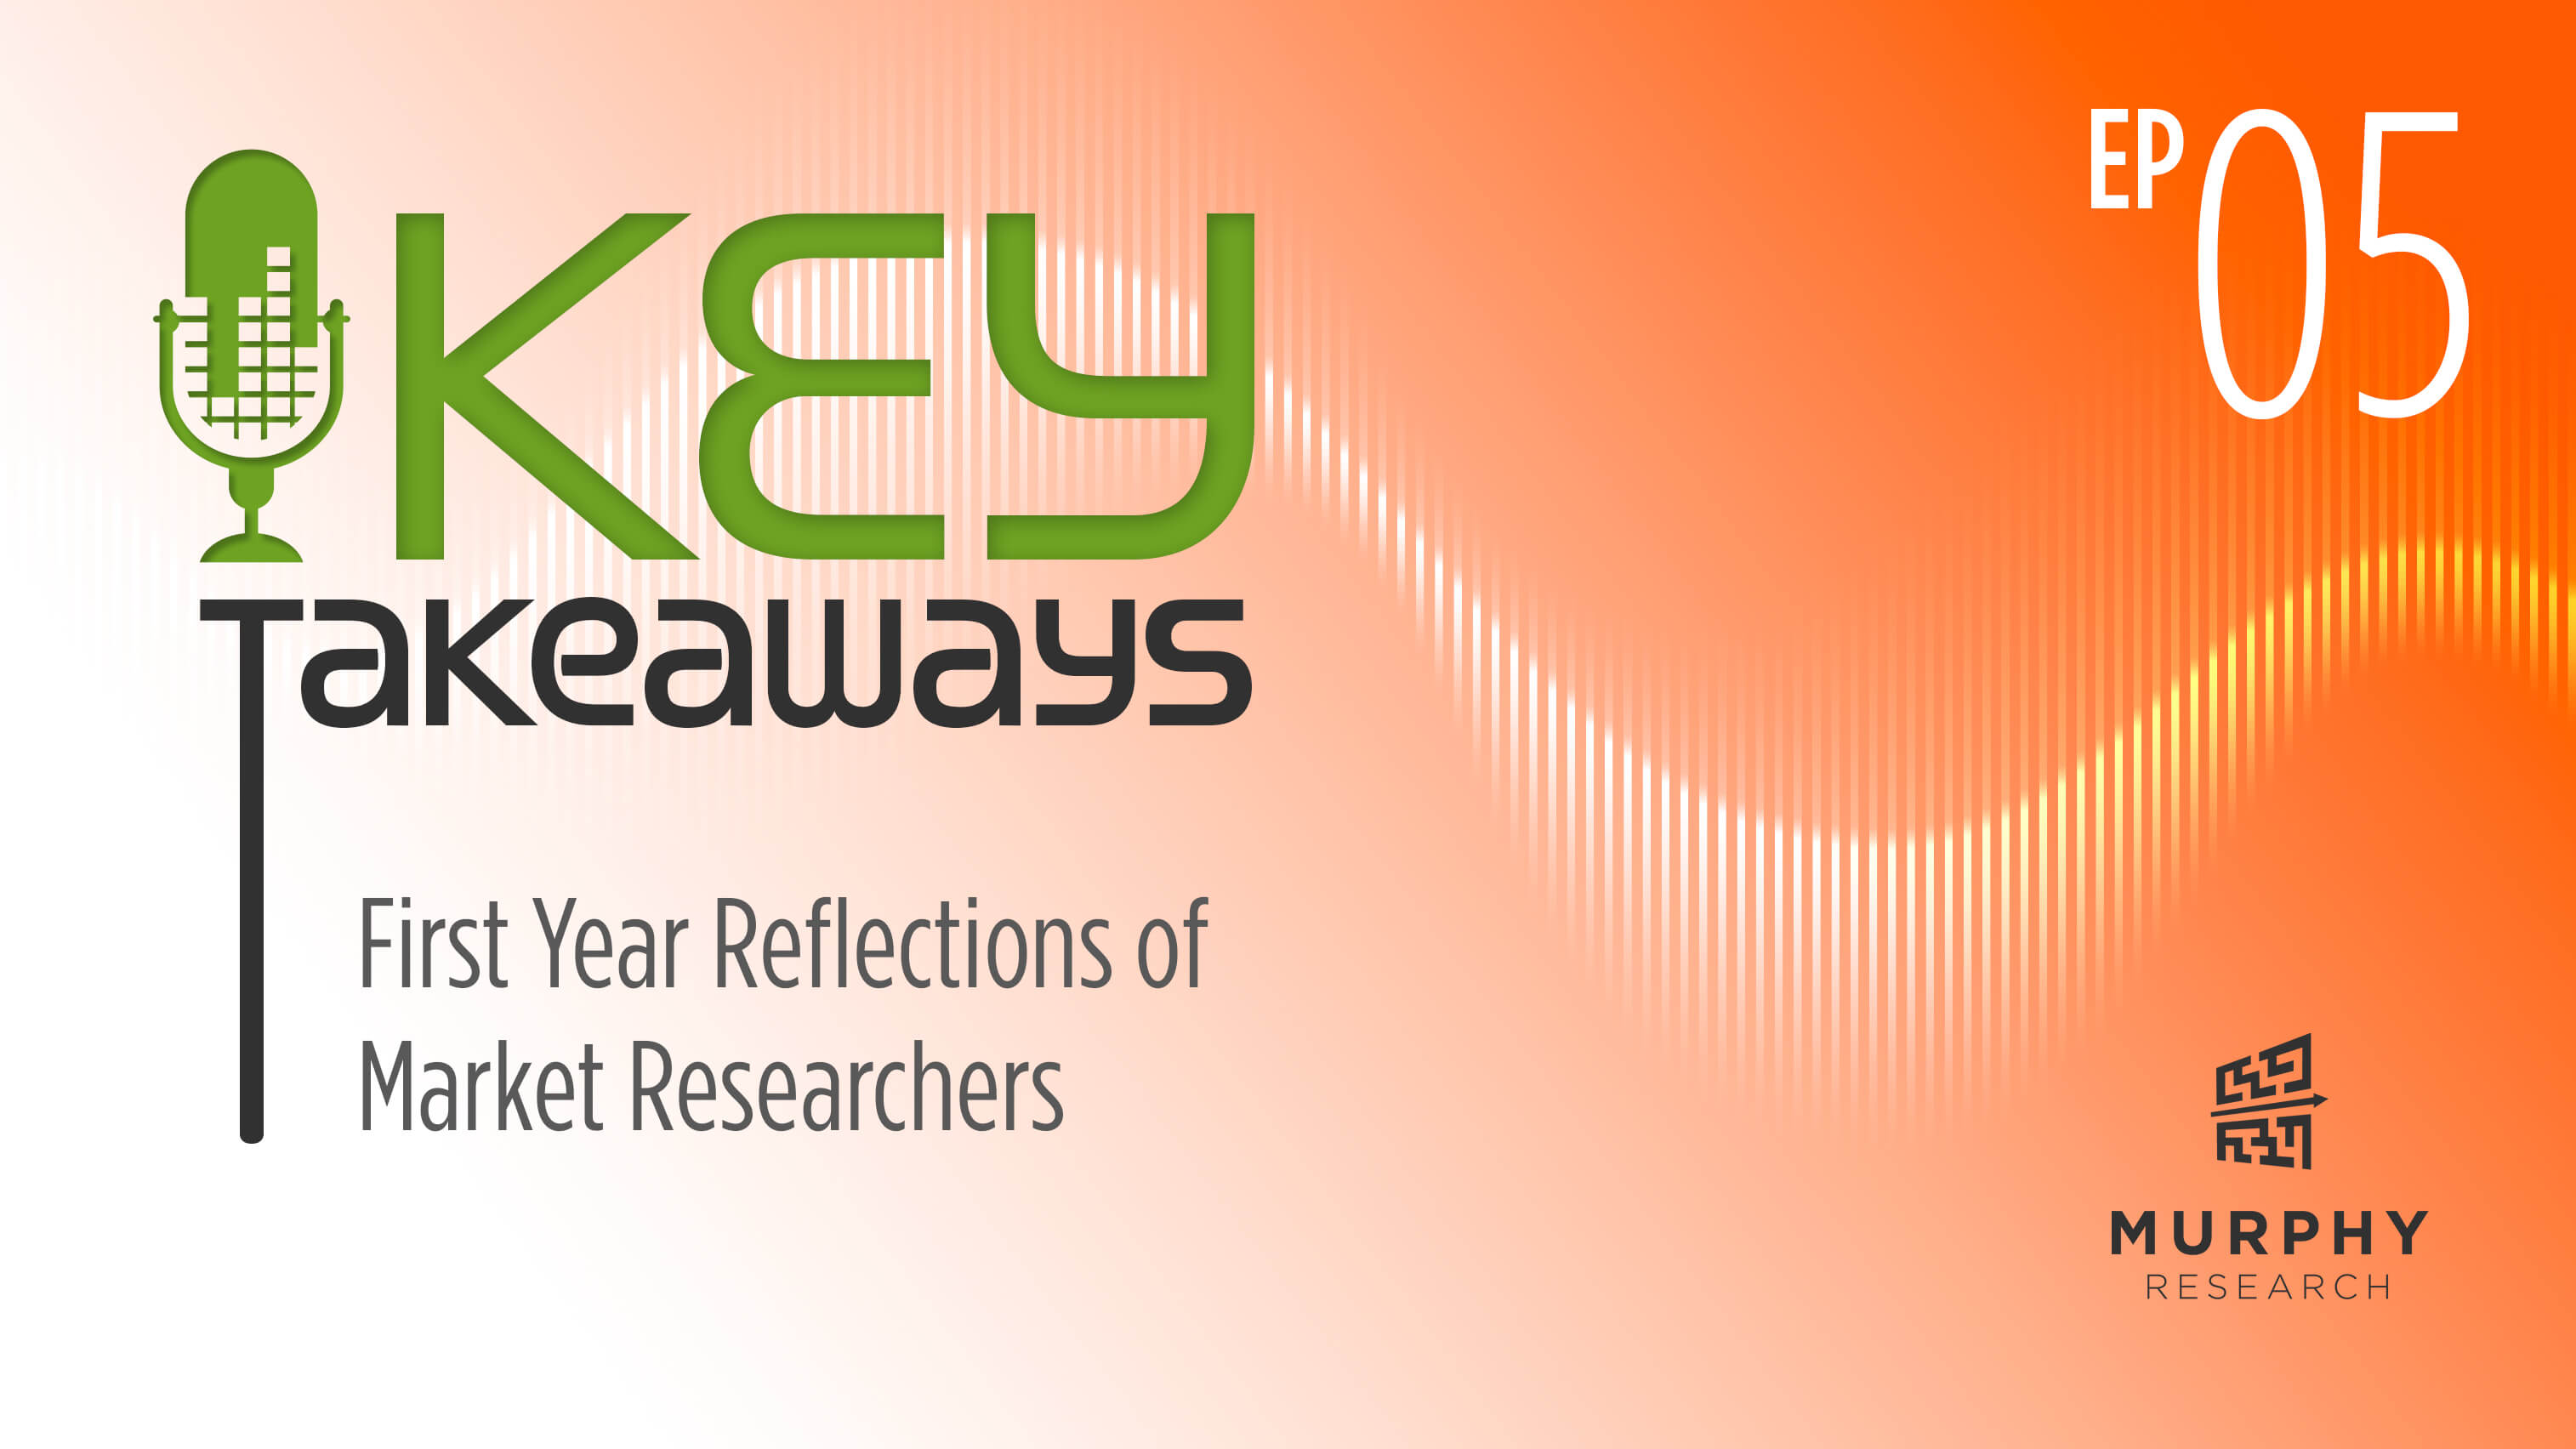 First Year Reflections of Market Researchers